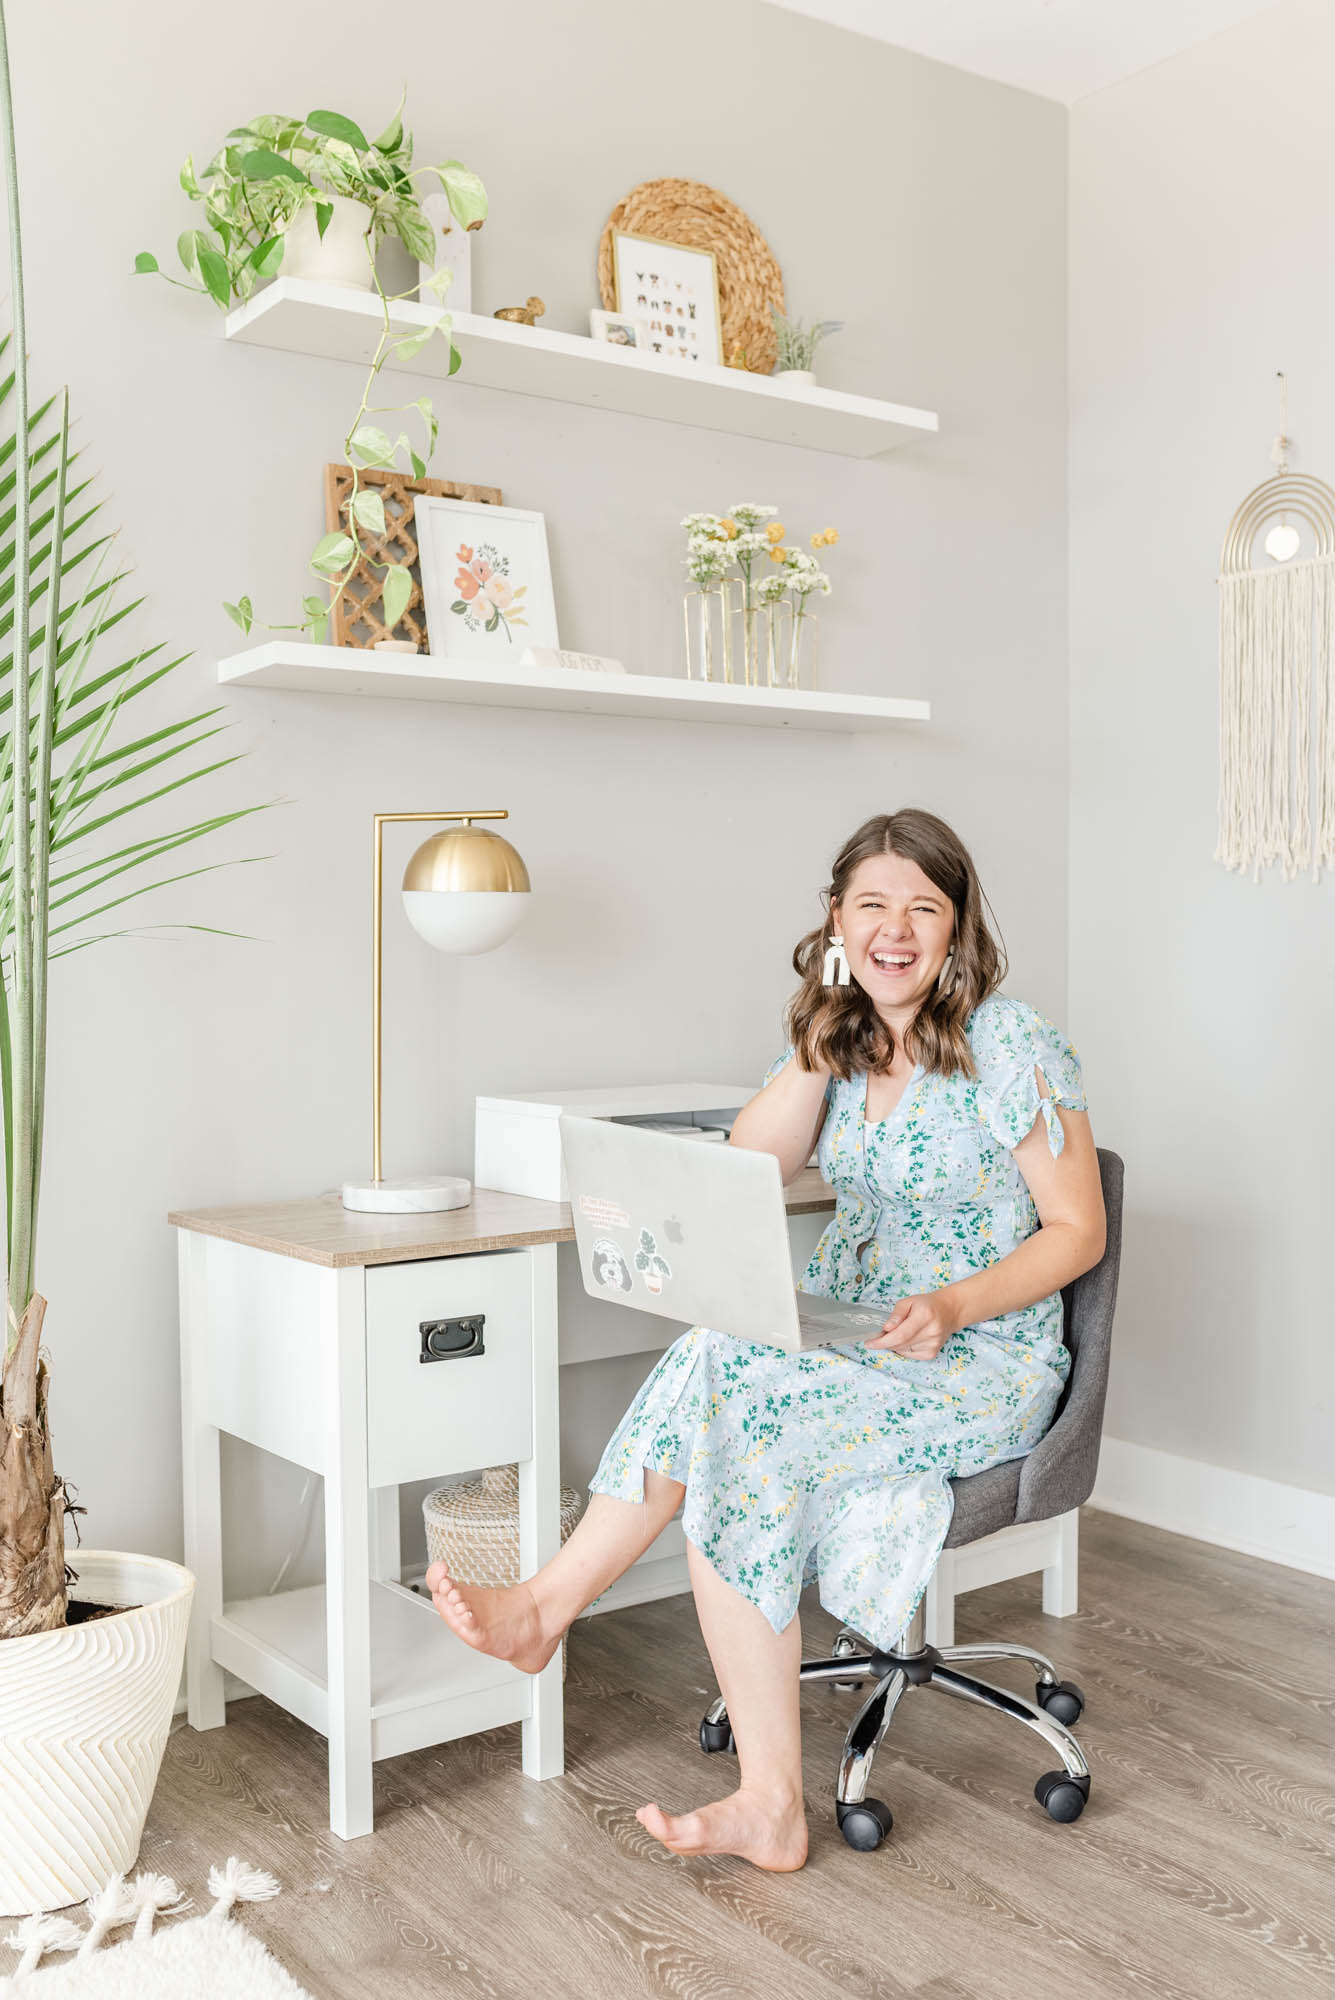 Easy Self Portrait Photography at Home: Tips for Self-Portrait Branding Photos by online educator Stephanie Kase Photography